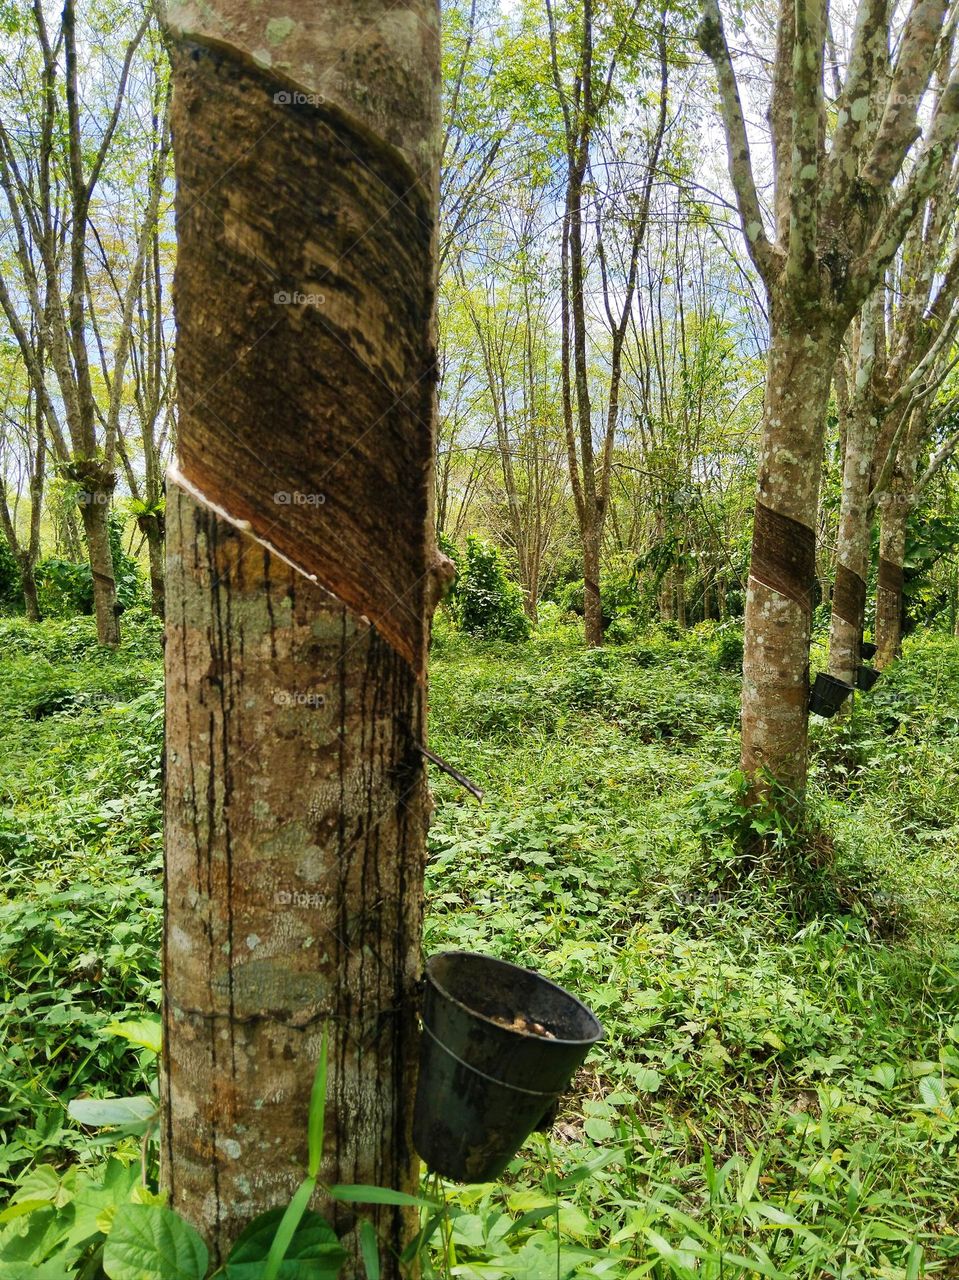 Rubber trees.